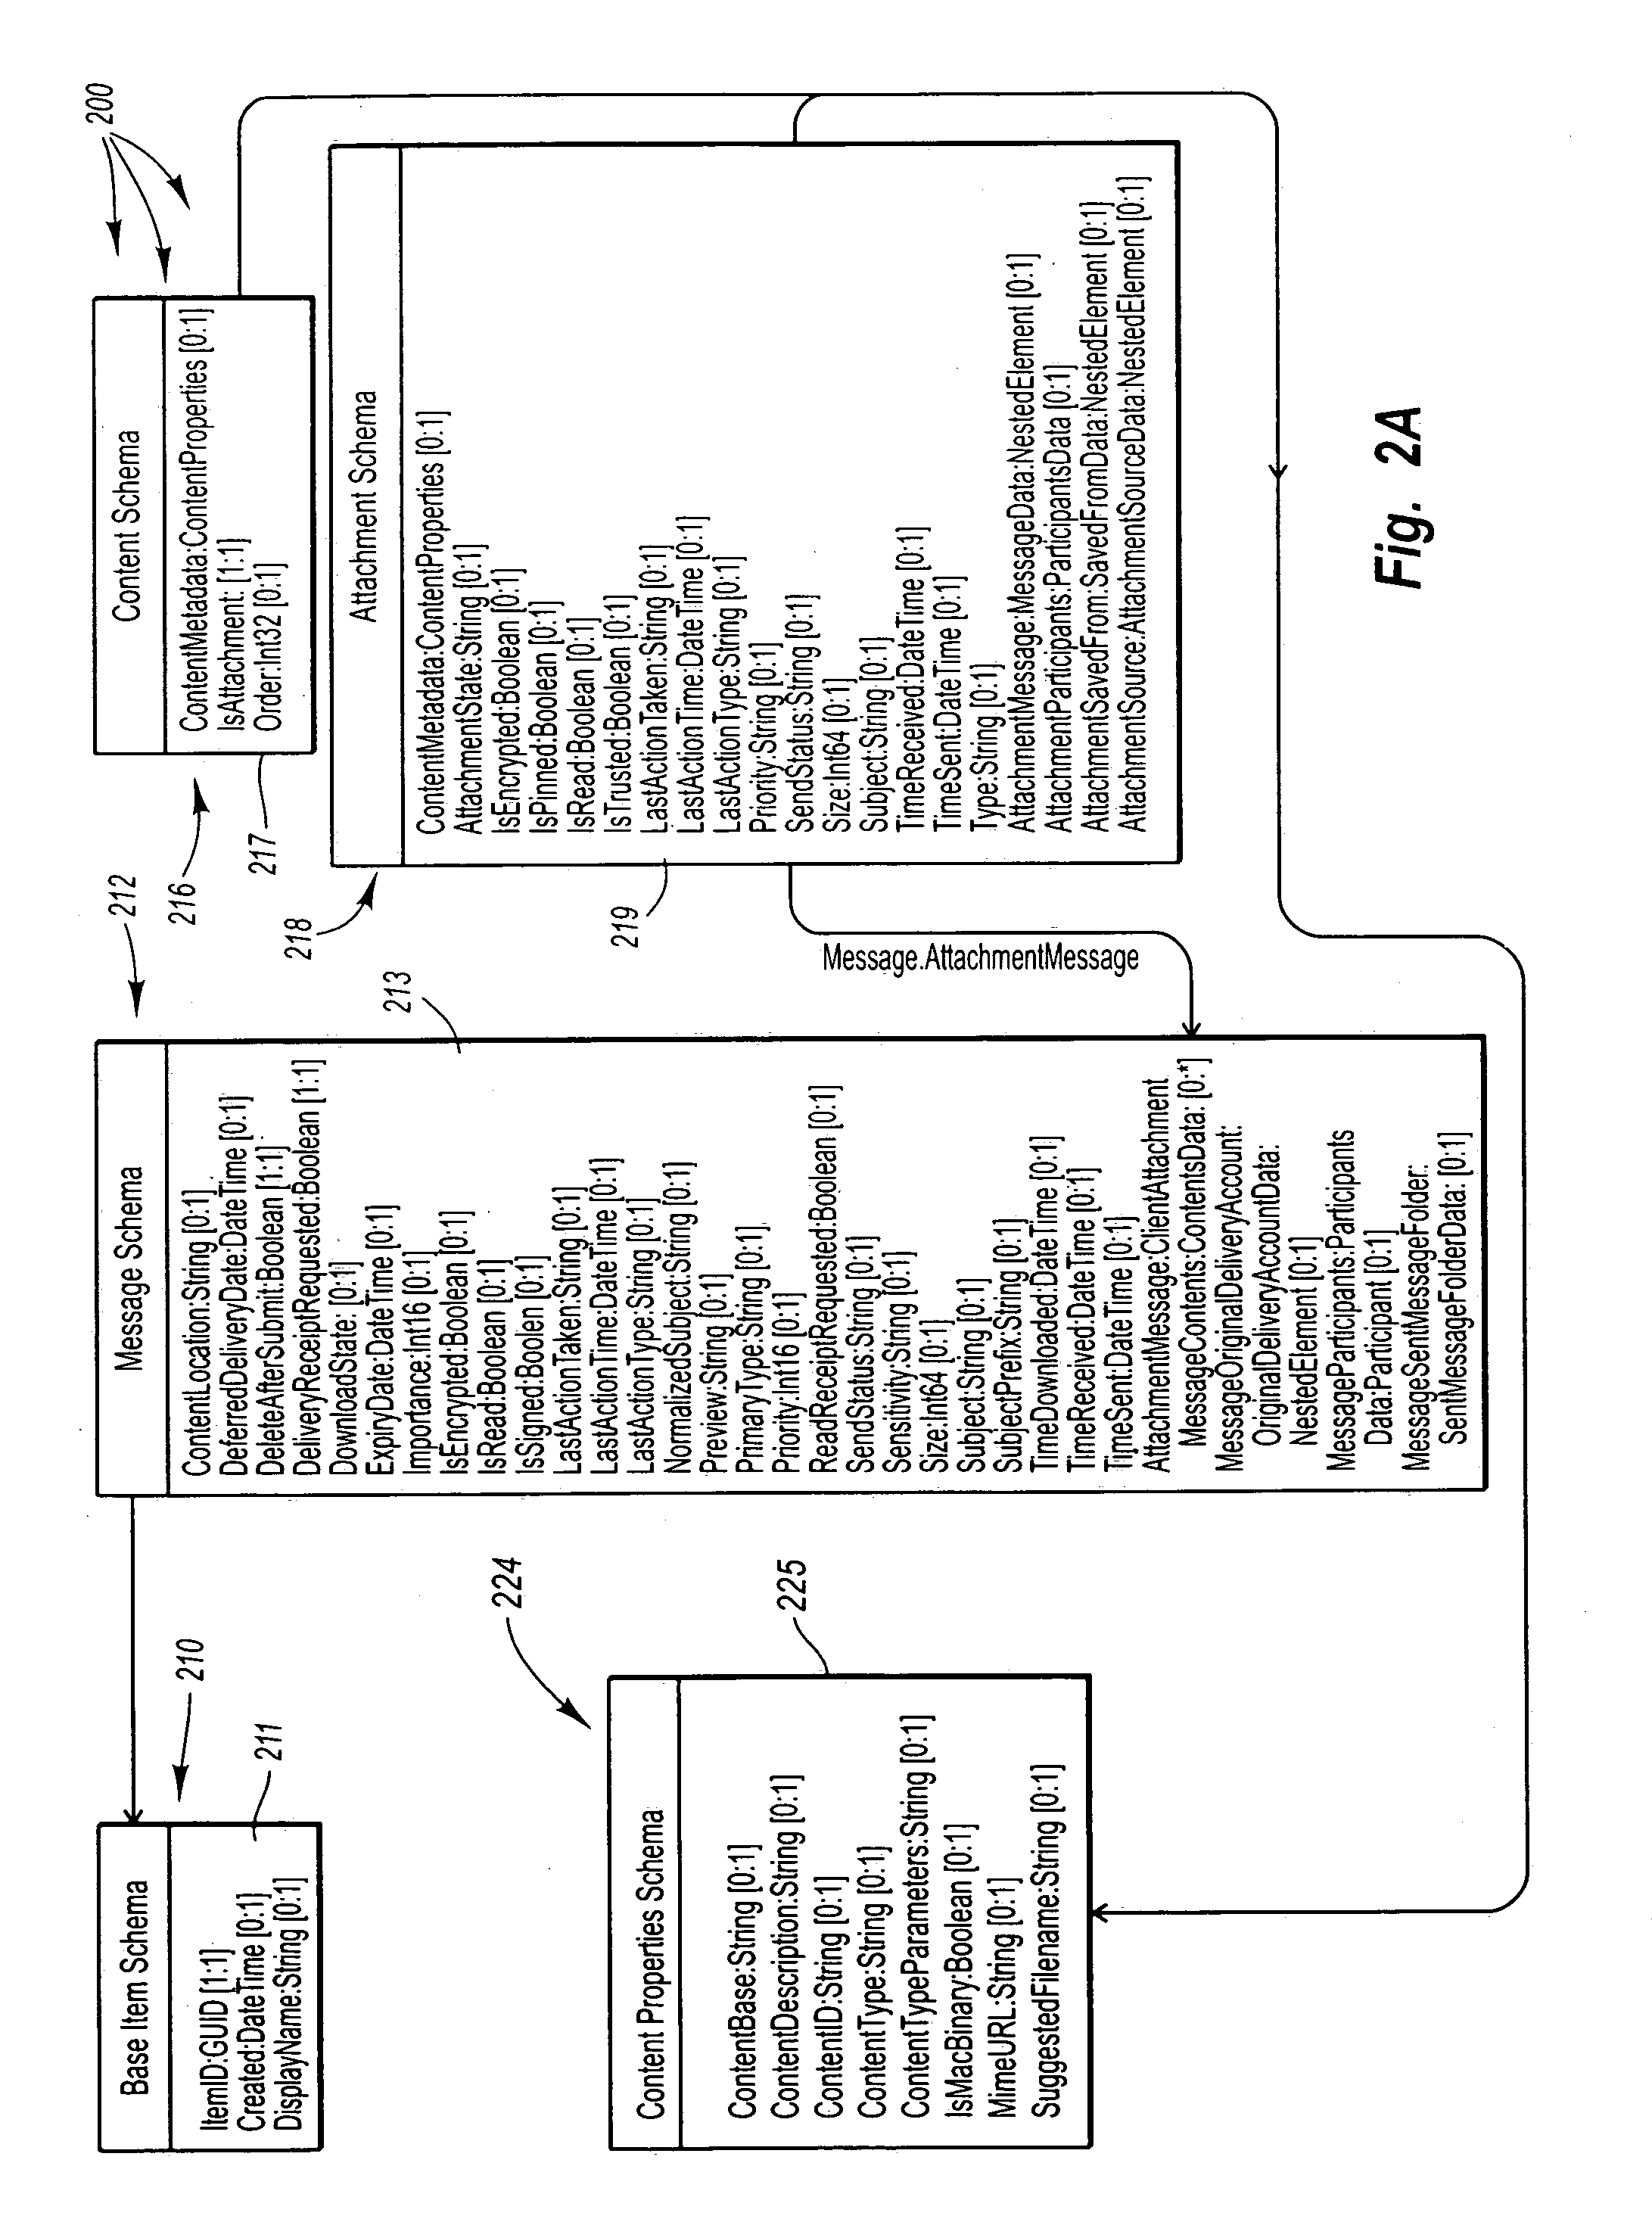 Accessing different types of electronic messages through a common messaging interface